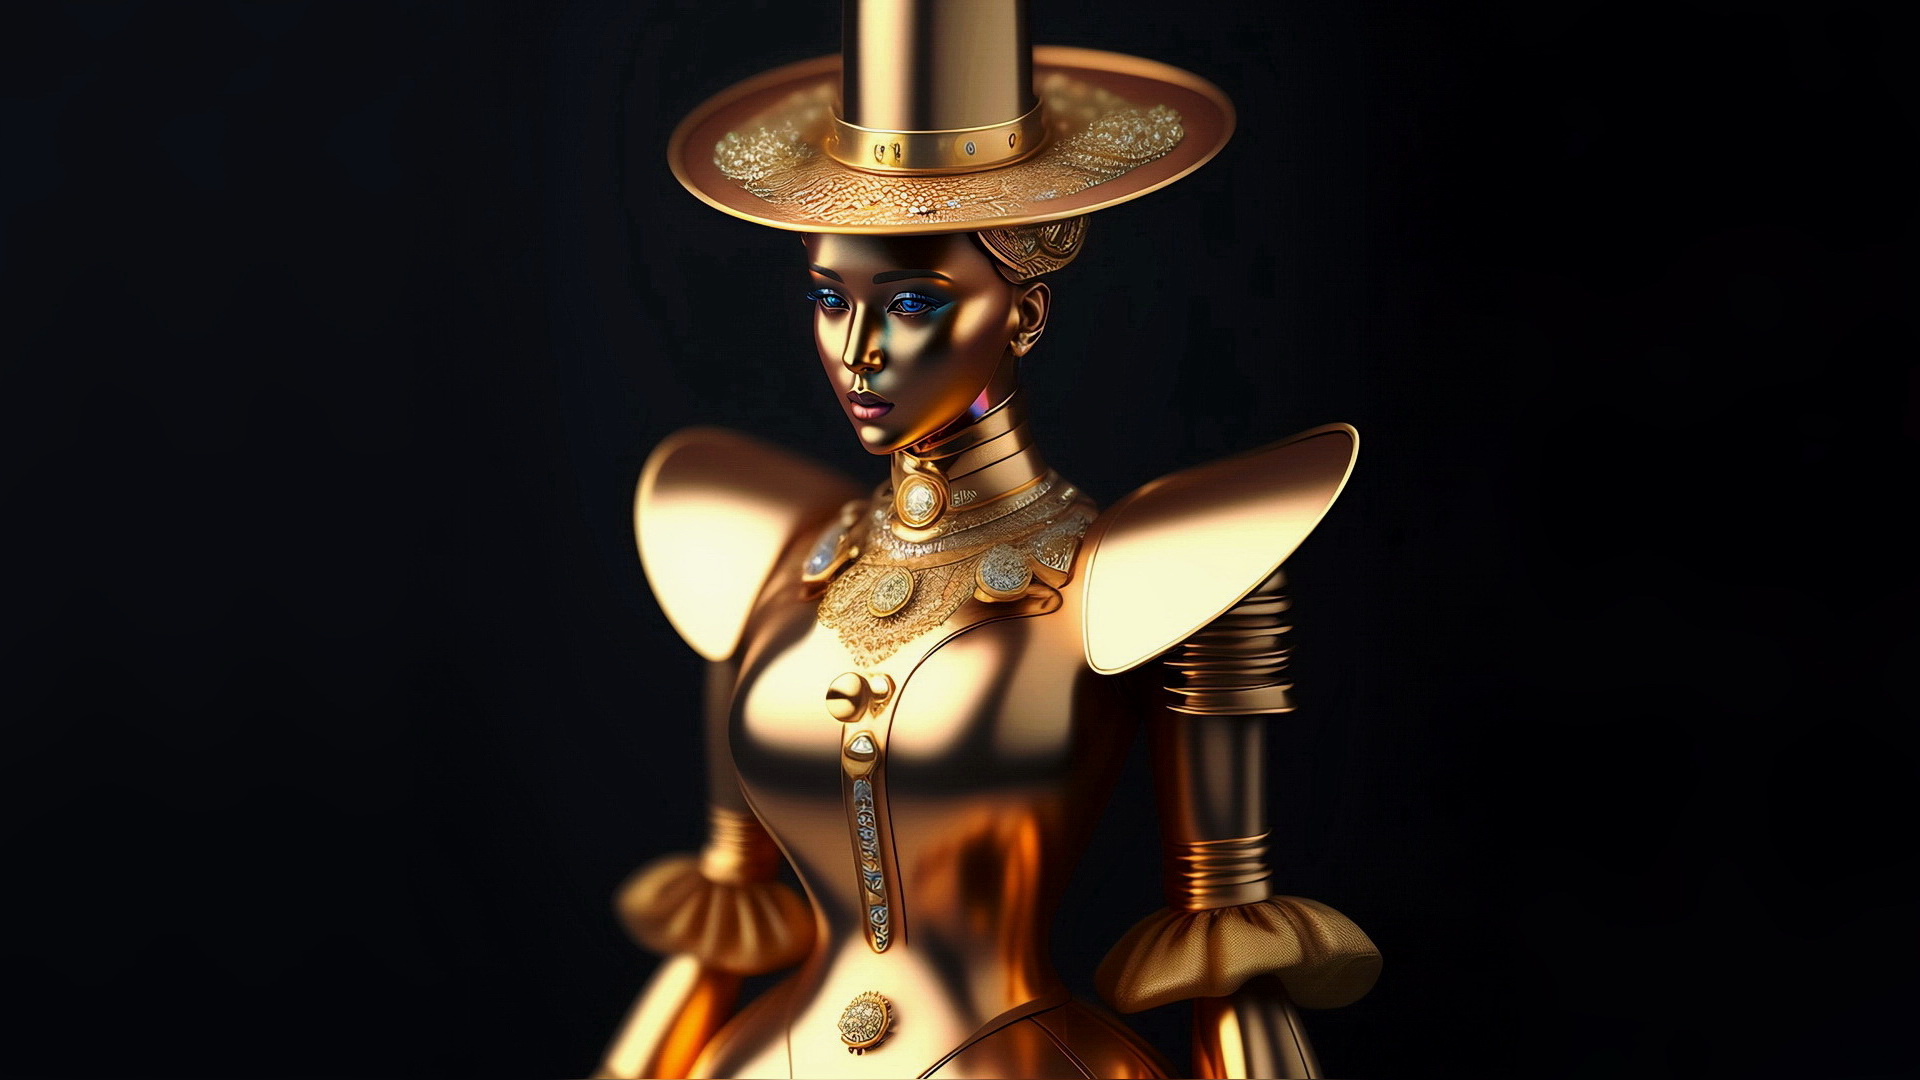 Free photo Golden robot girl on black background with hat